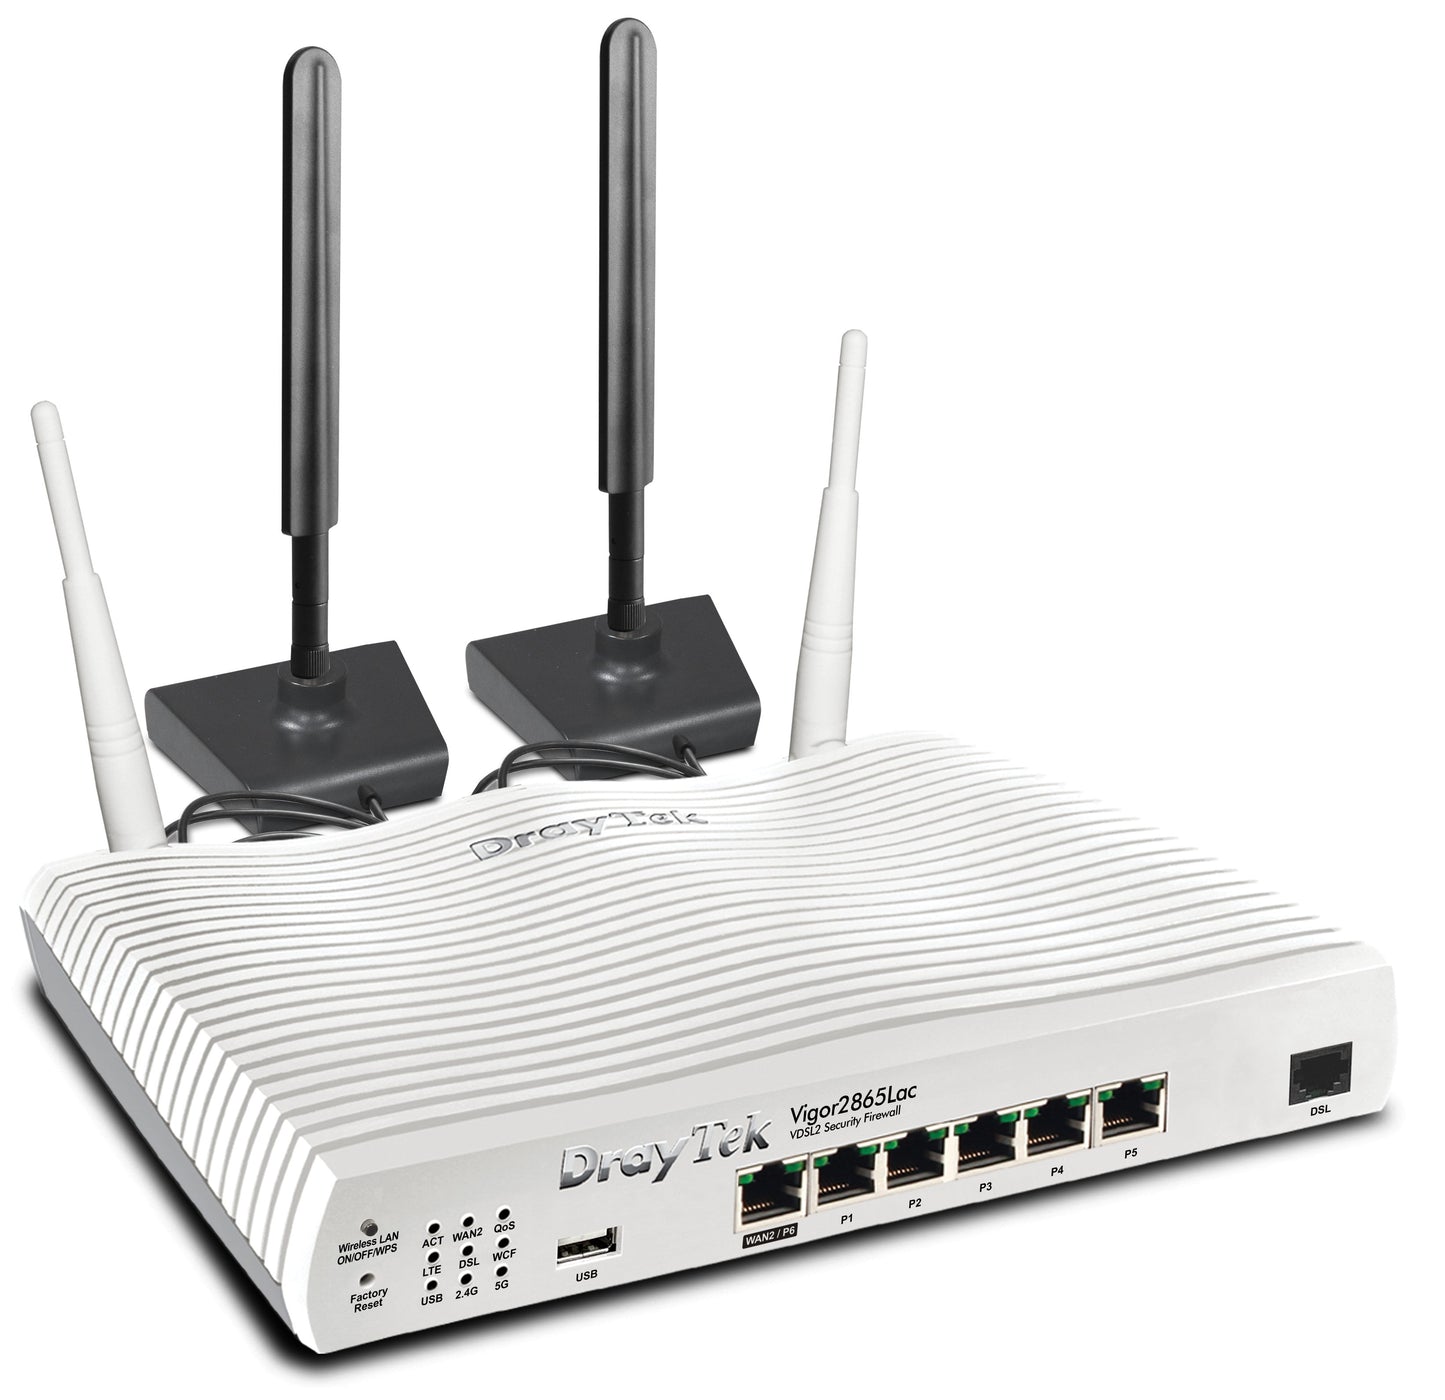 DrayTek 2865LAC Multi-WAN Firewall VPN Router AC1300 4G/LTE Modem Front View with 4 x Antennas Showing